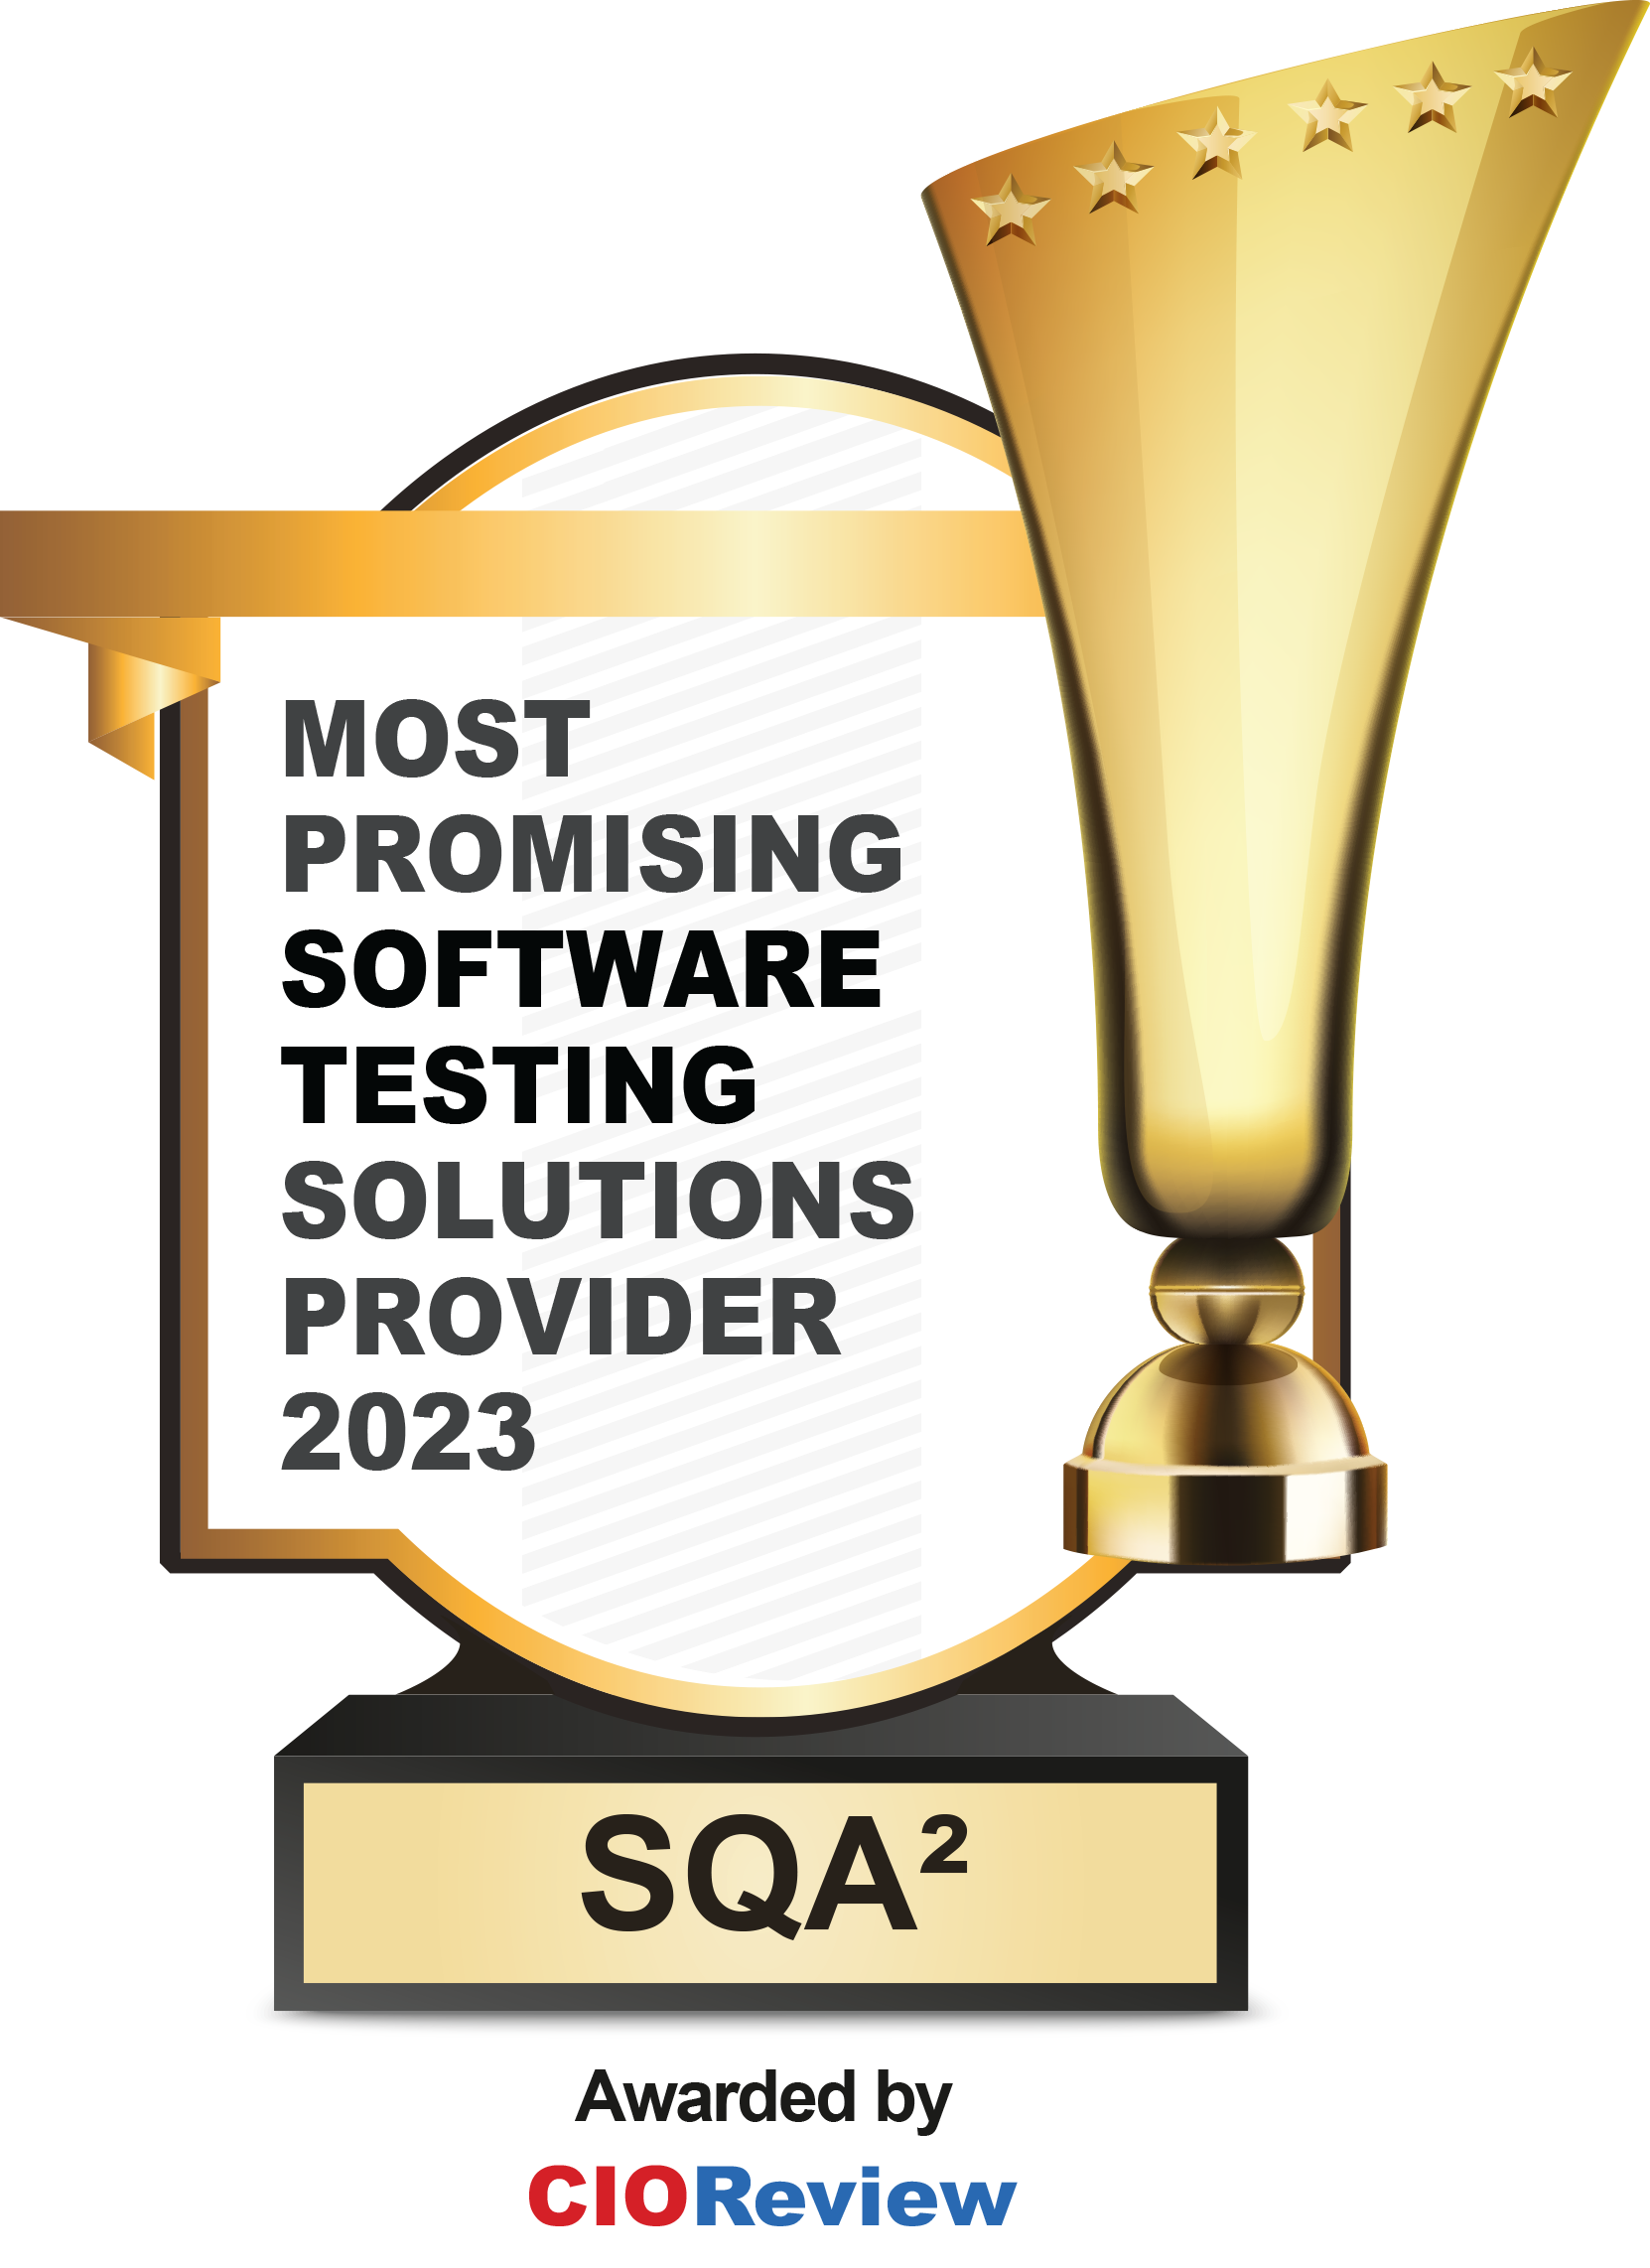 CIO Review award for Most Promising Software Testing Solution Provider for 2023